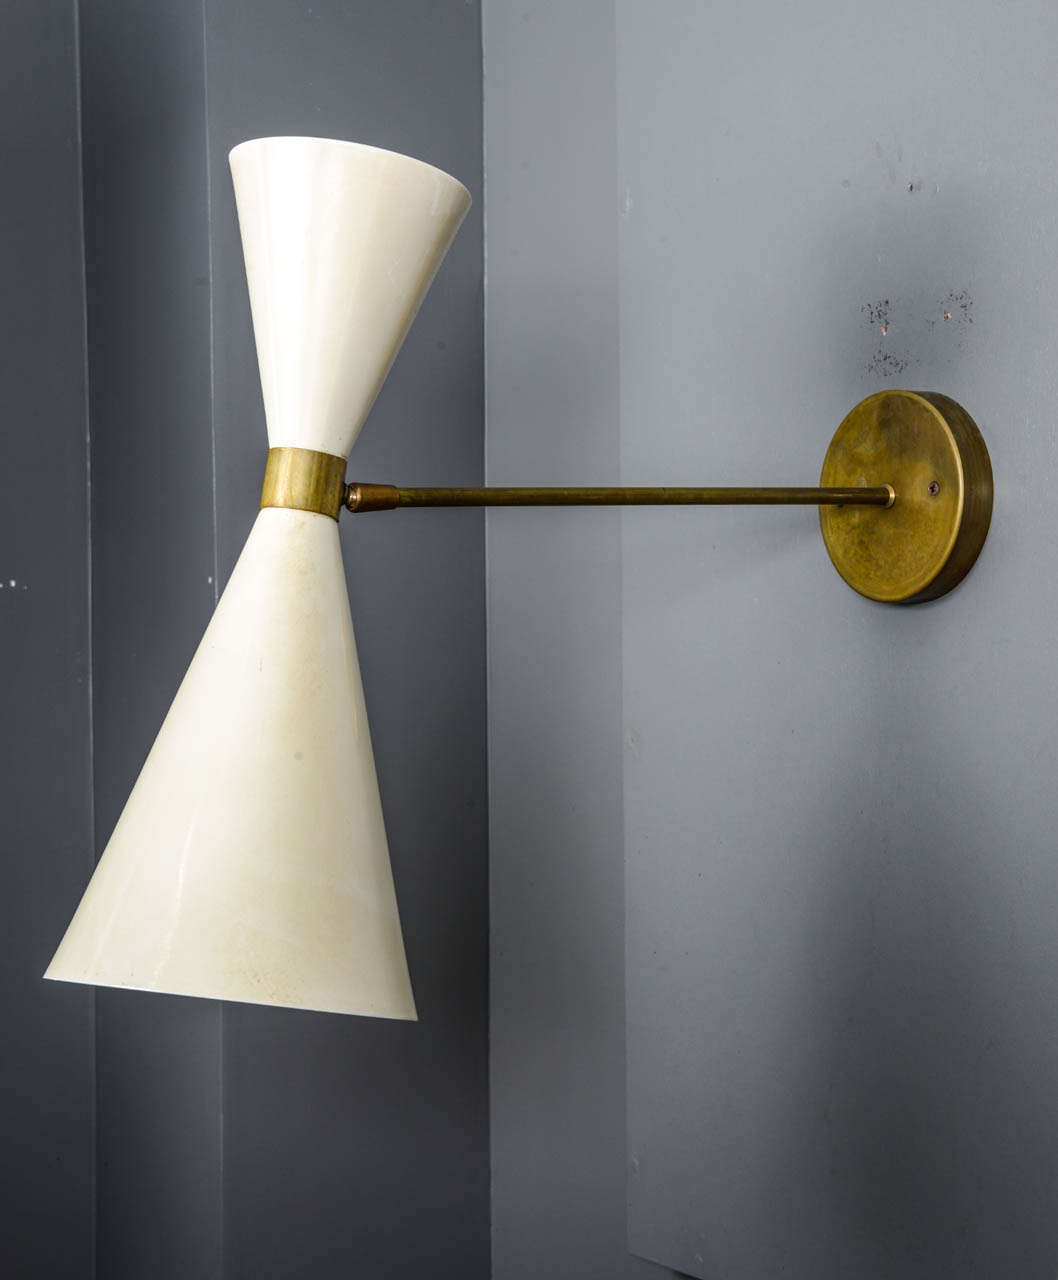 Set of four wall sconces designed by Stilnovo in the 1960s.
Made of a brass arm and two white enameled metal cones.

Two lights per sconces, new electrification.